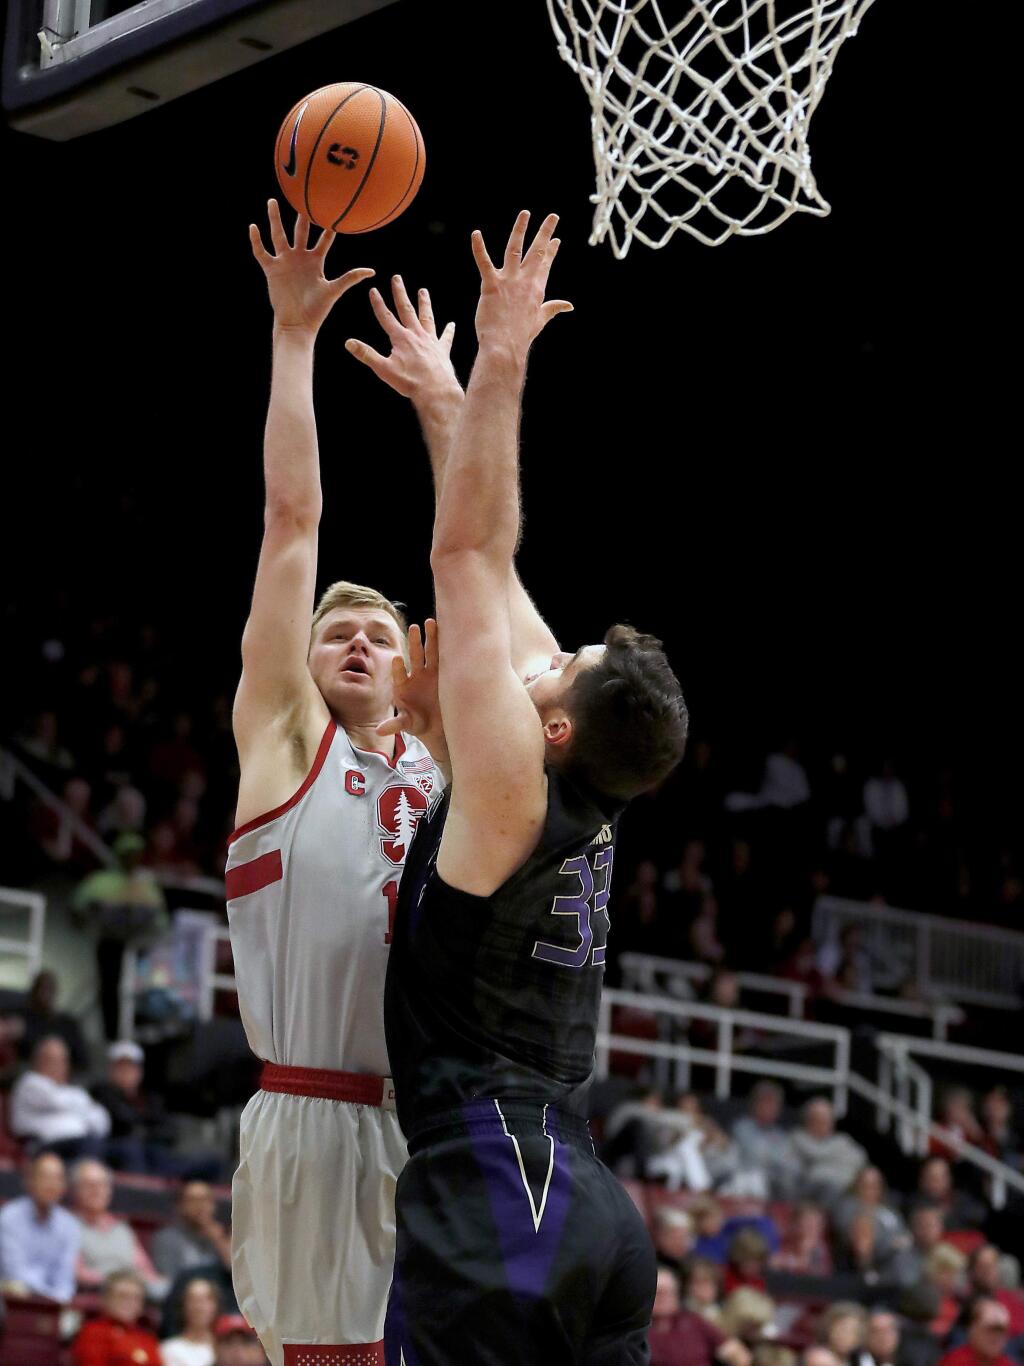 Stanford forward Michael Humphrey (10) takes a shot over Washington forward Sam Timmins (33) during the first half of an NCAA college basketball game Thursday, Feb. 22, 2018, in Stanford, Calif. (AP Photo/Tony Avelar)